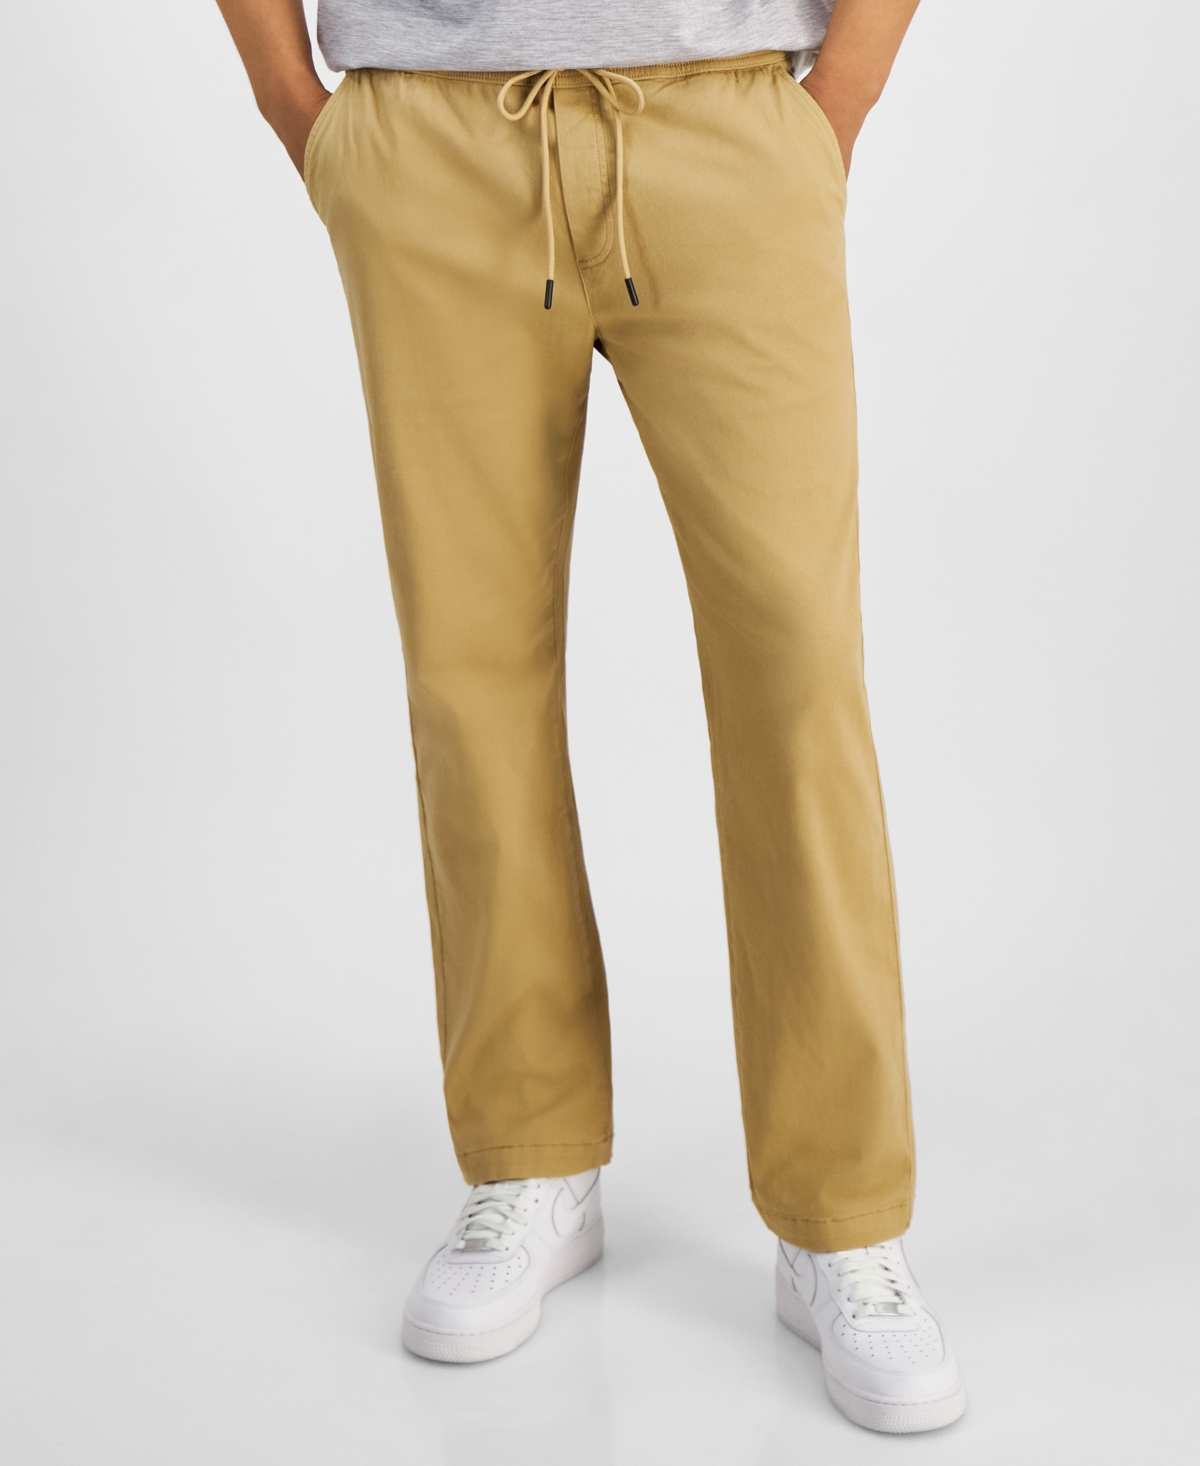 AND NOW THIS MEN'S REGULAR-FIT TWILL DRAWSTRING PANTS, CREATED FOR MACY'S